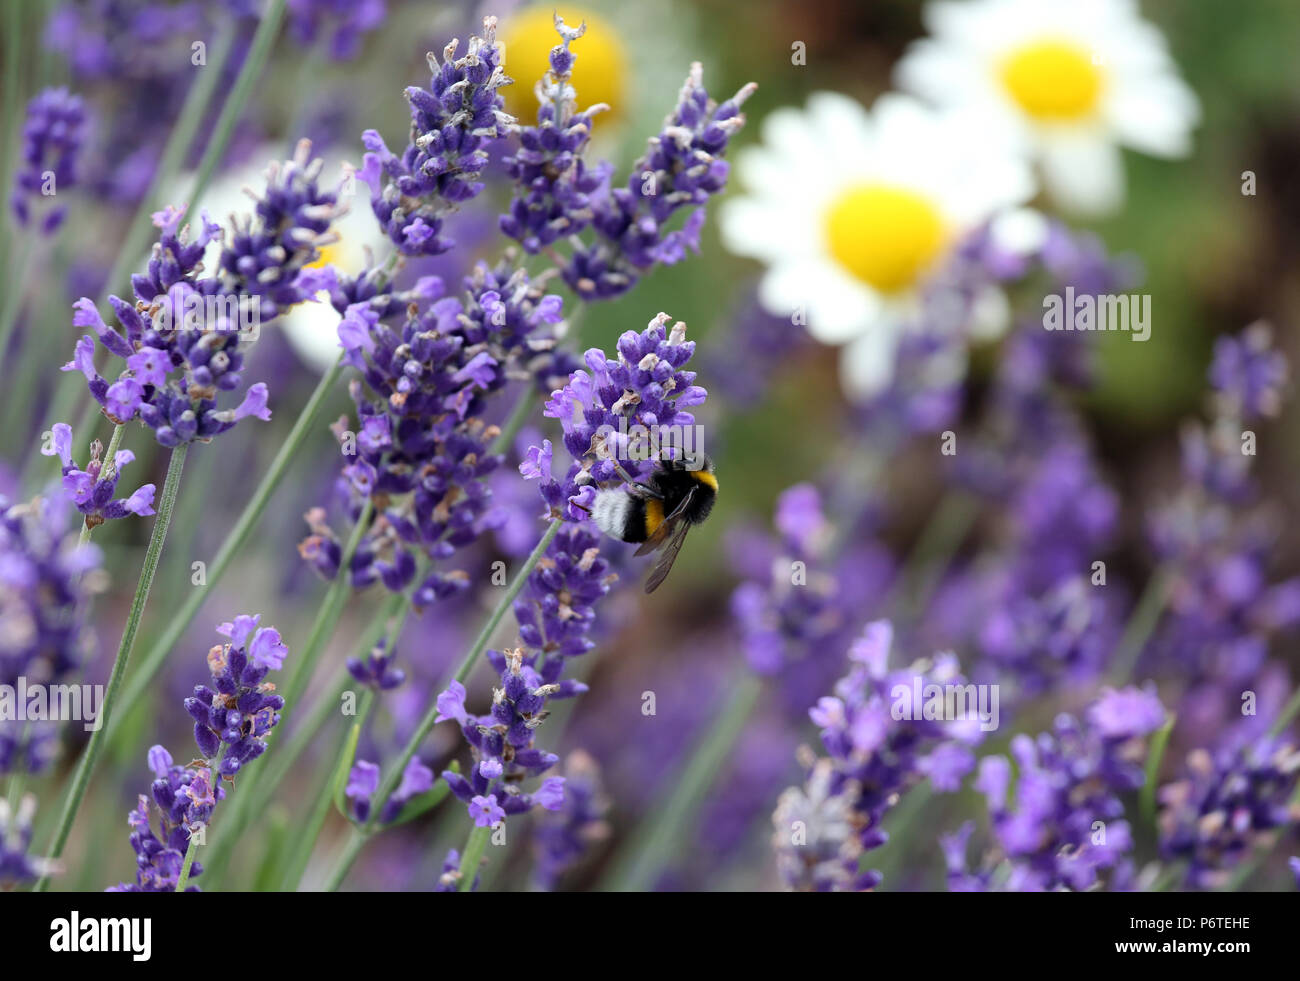 Berlin, Germany, Dark bumblebee collects nectar from a lavender flower Stock Photo